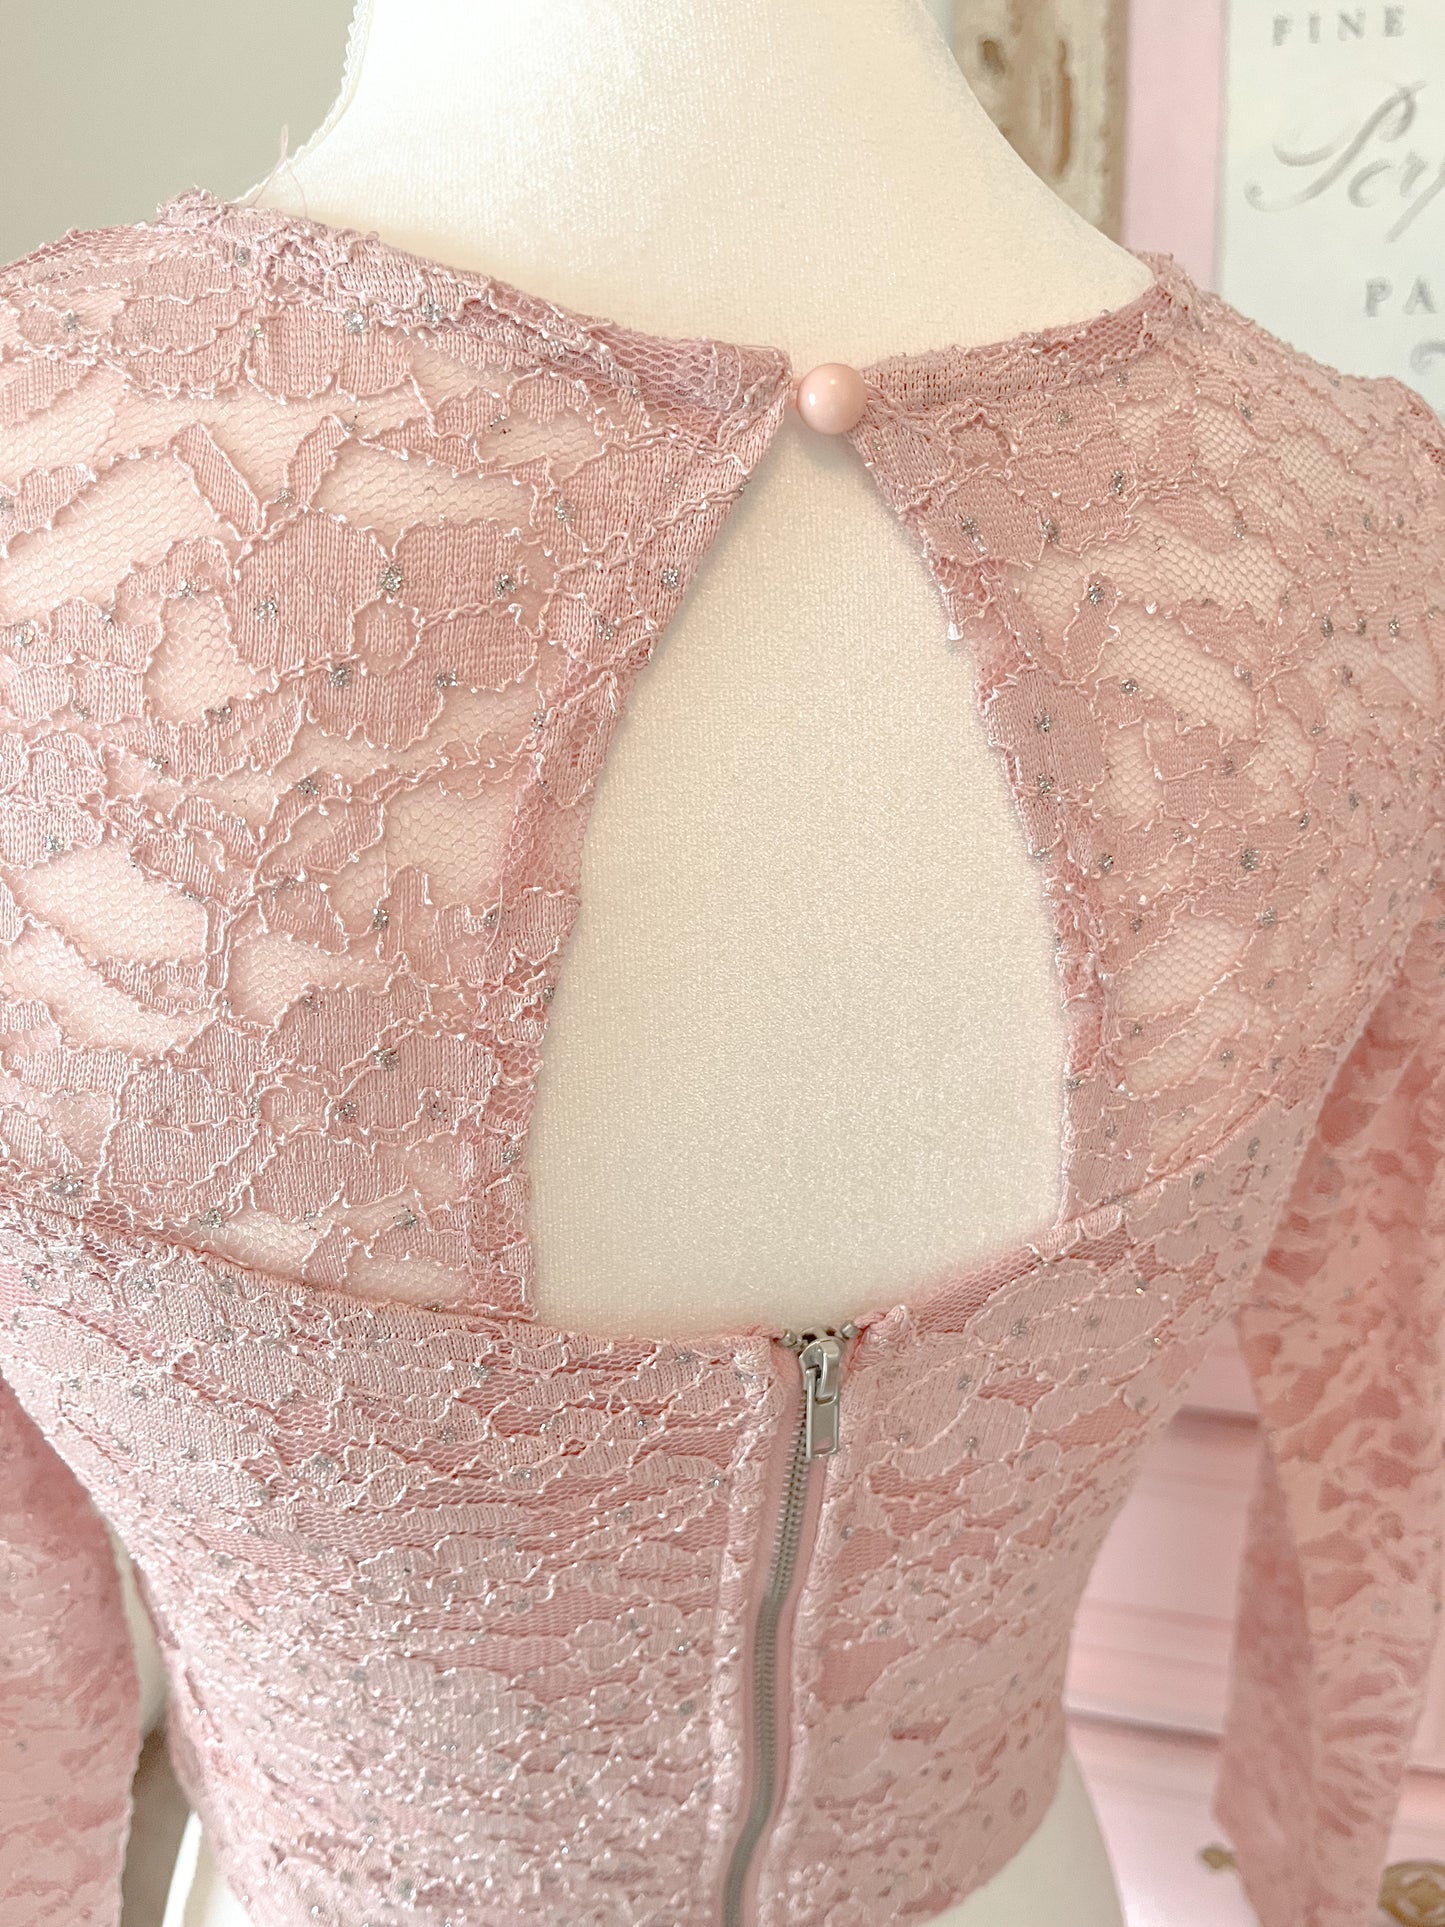 Pink Lace Sparkle Crop Top size extra small